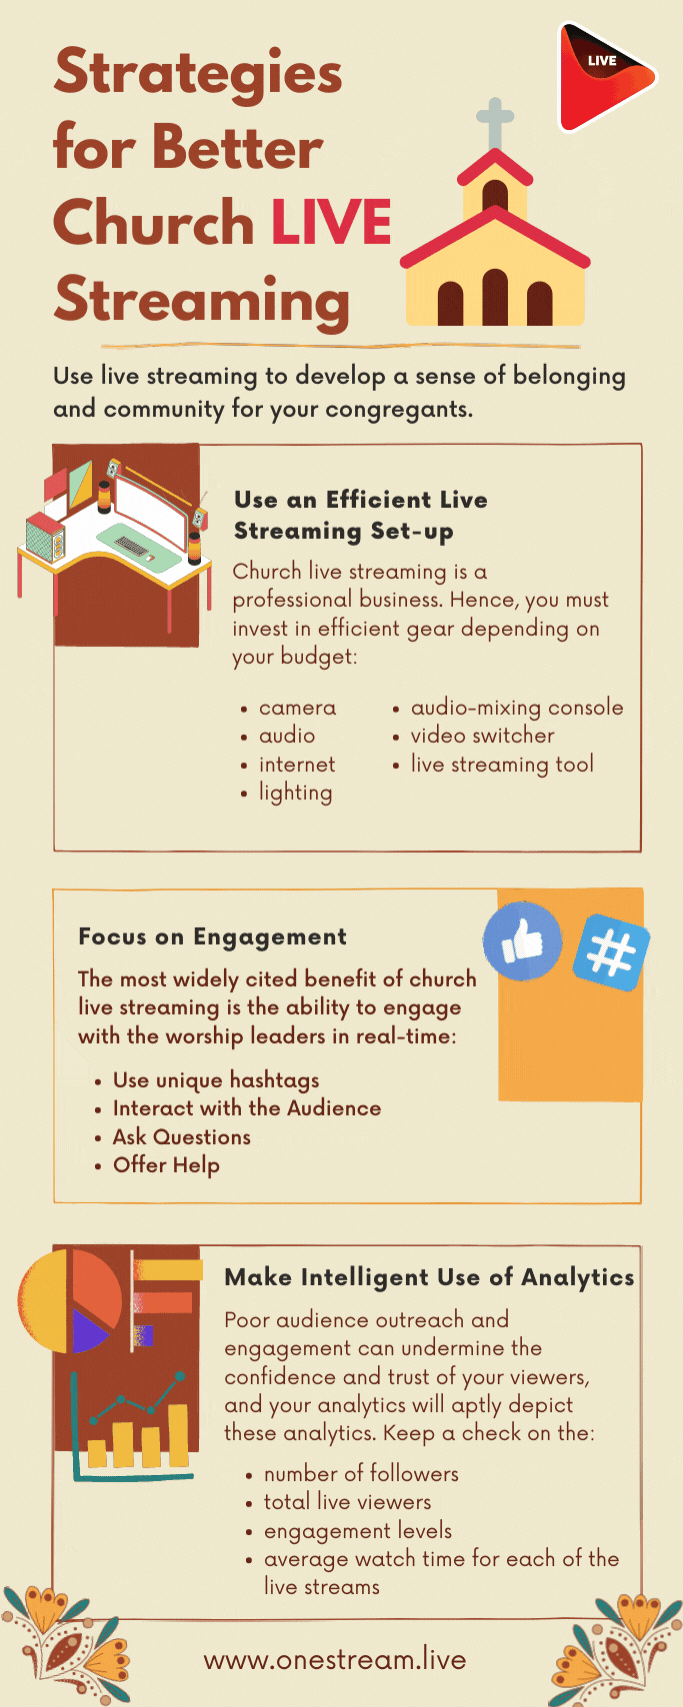 Strategies for Better Church Streaming